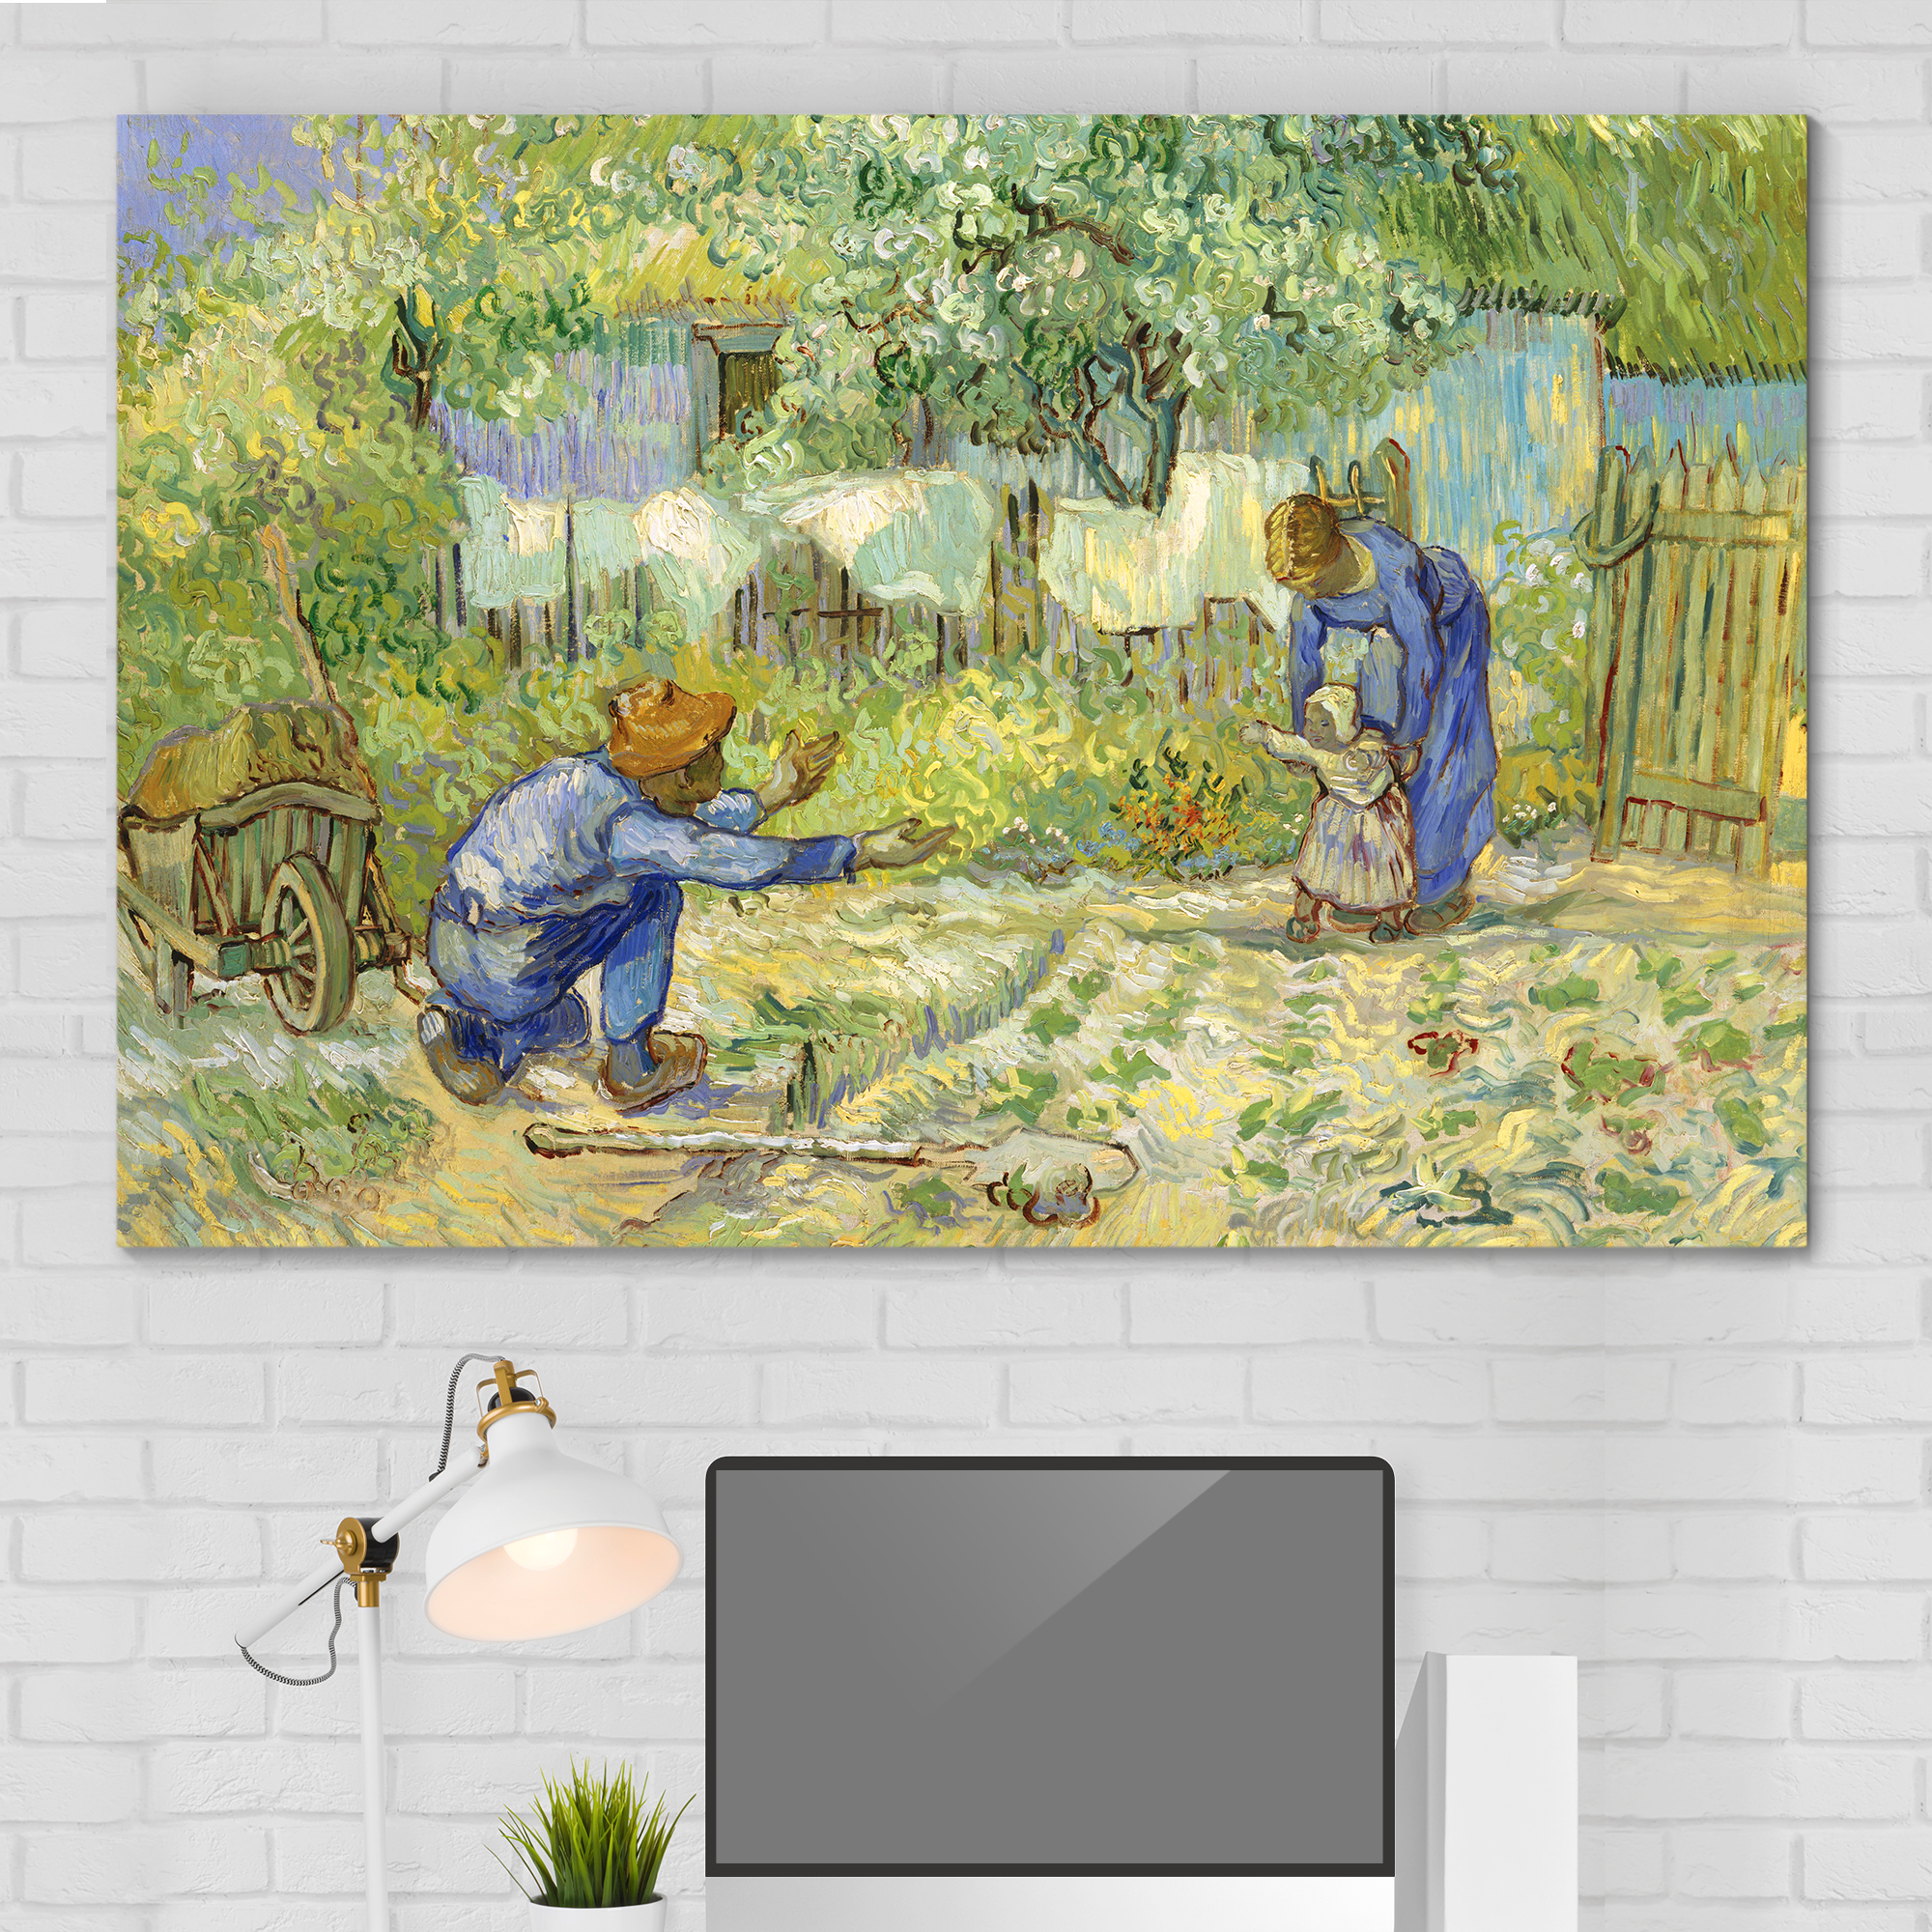 First Steps (after Millet) Vincent Van Gogh - Oil Painting Reproduction on Canvas Prints Wall Art, Ready to Hang - 16x24 inches